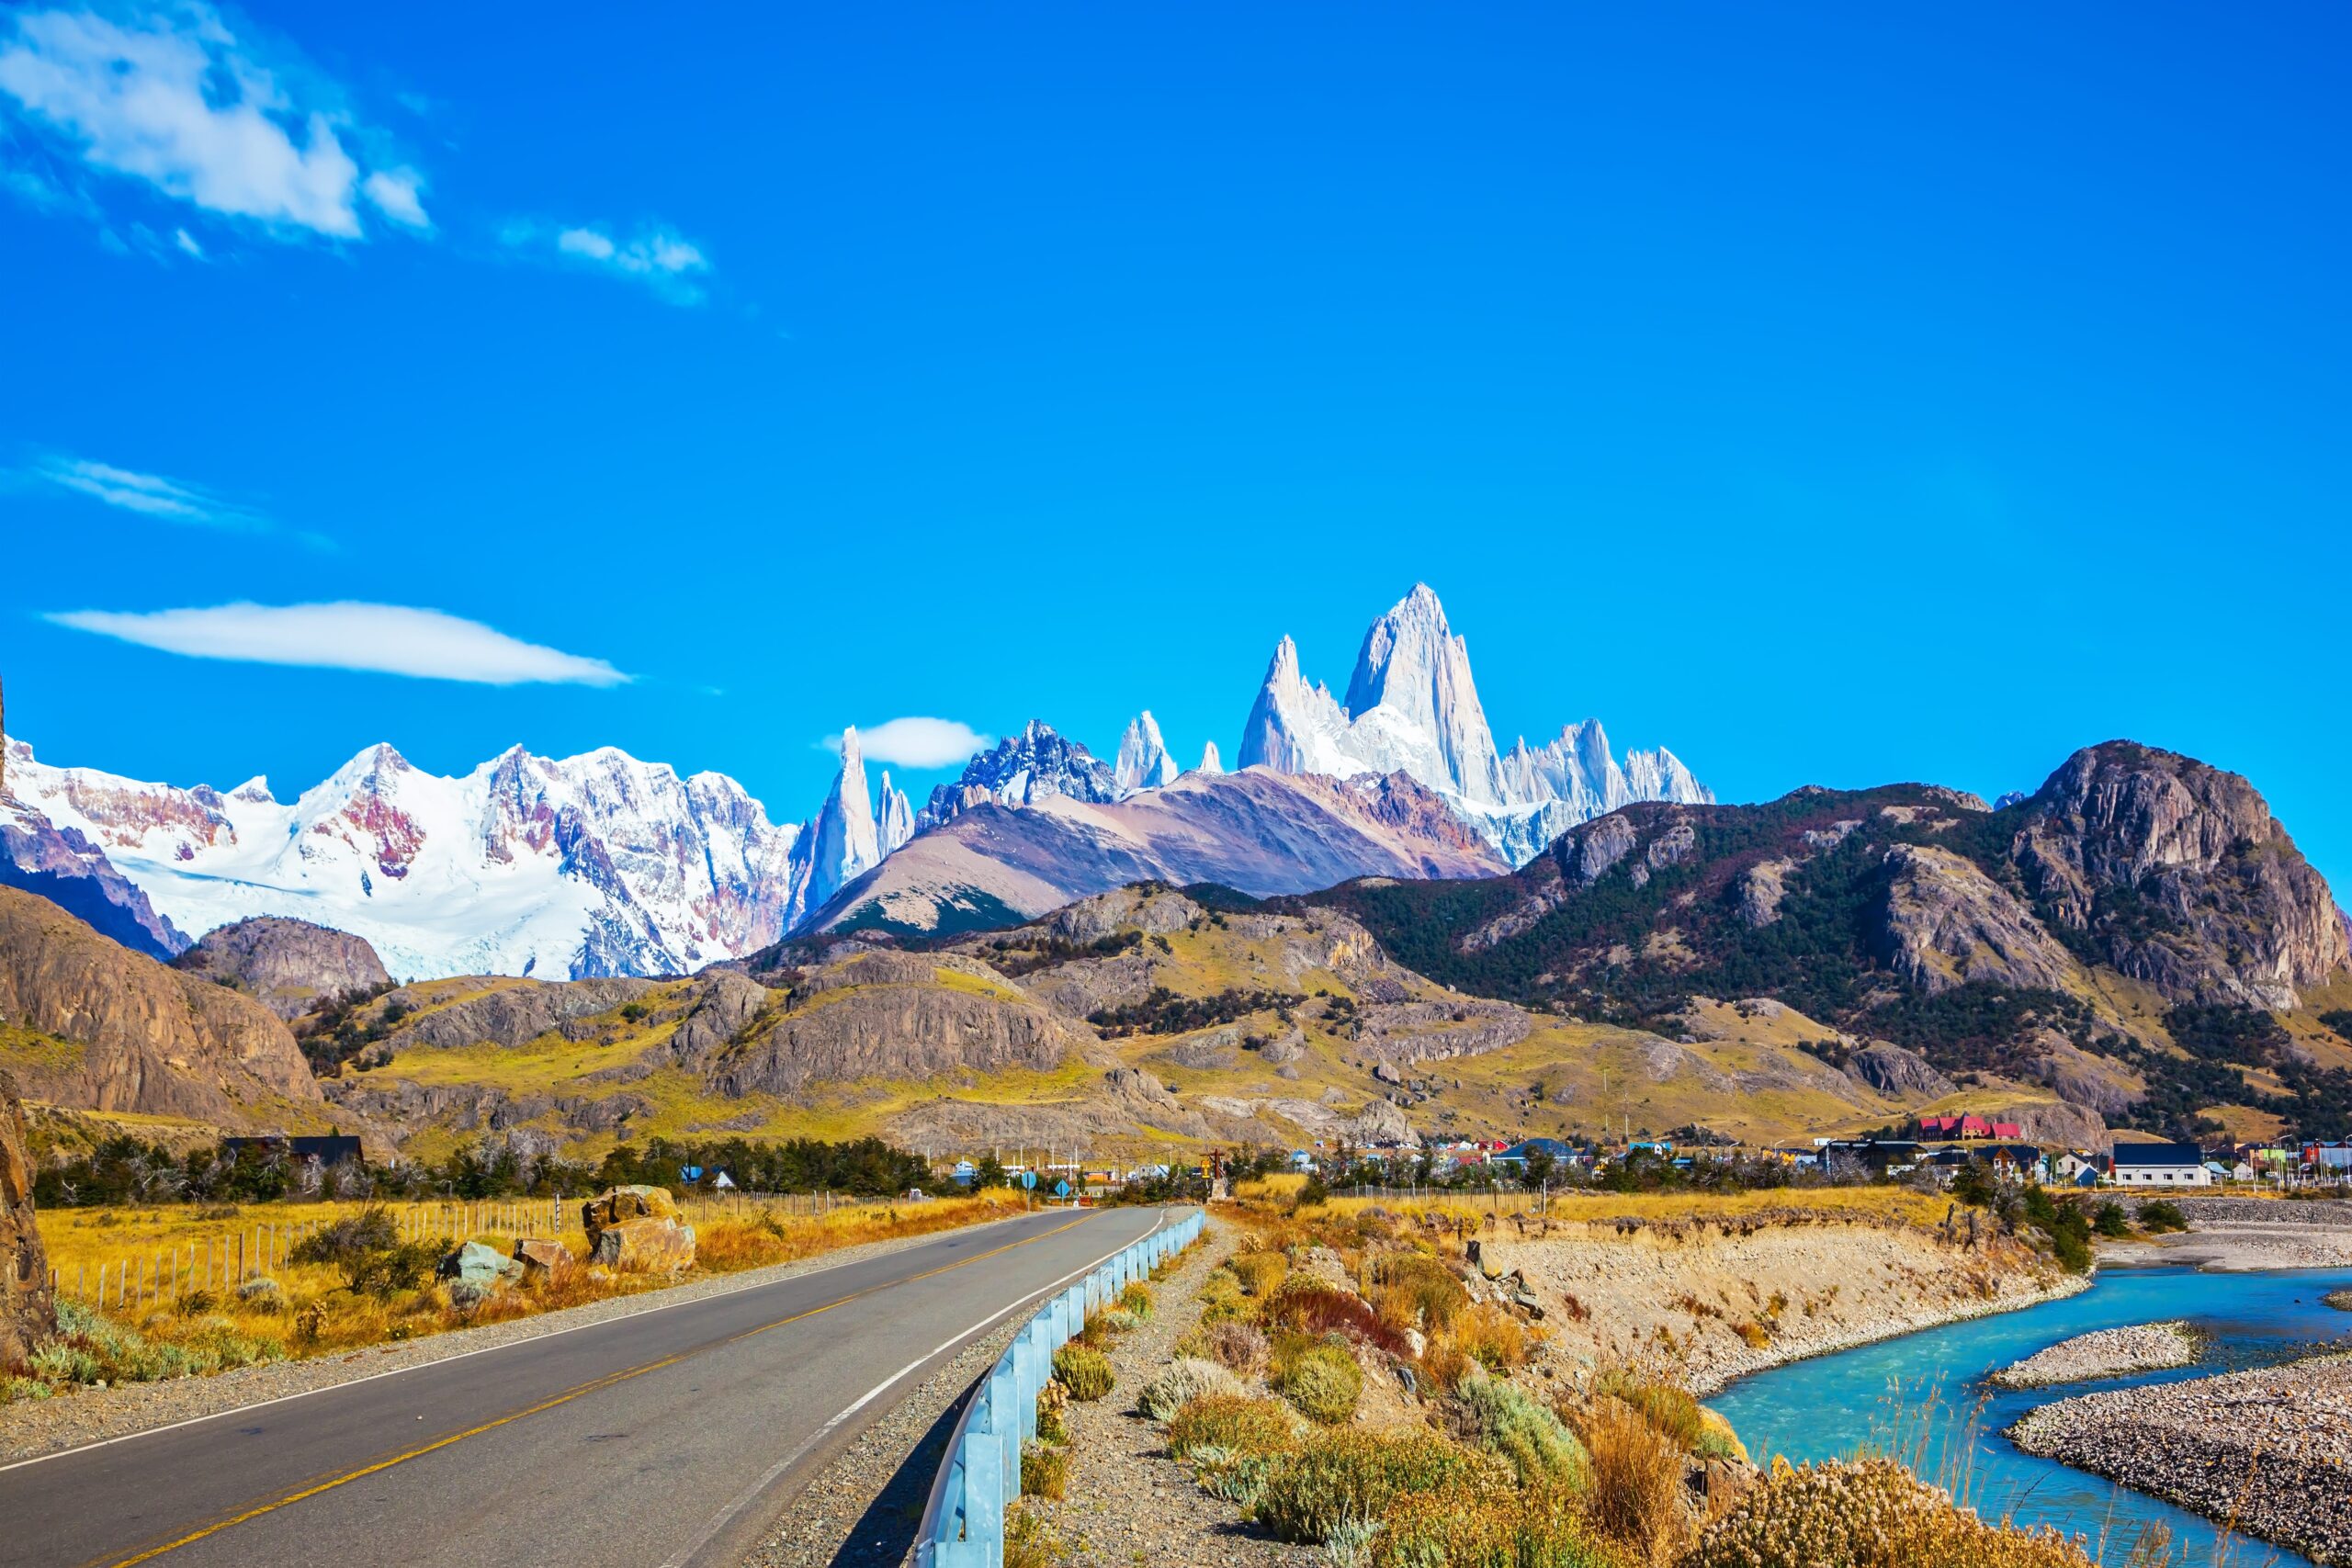 The sunny autumn day in Patagonia